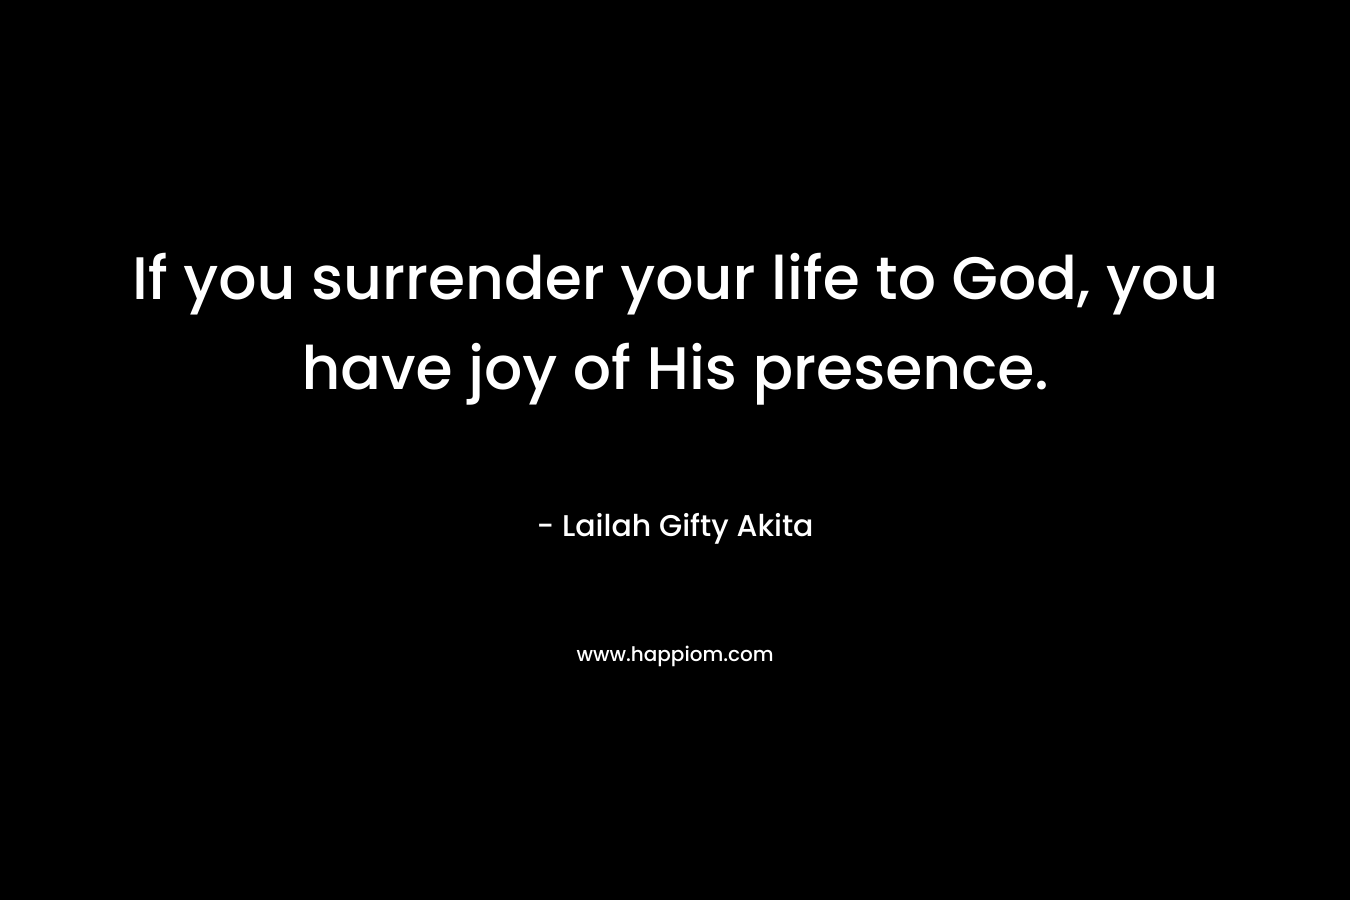 If you surrender your life to God, you have joy of His presence.